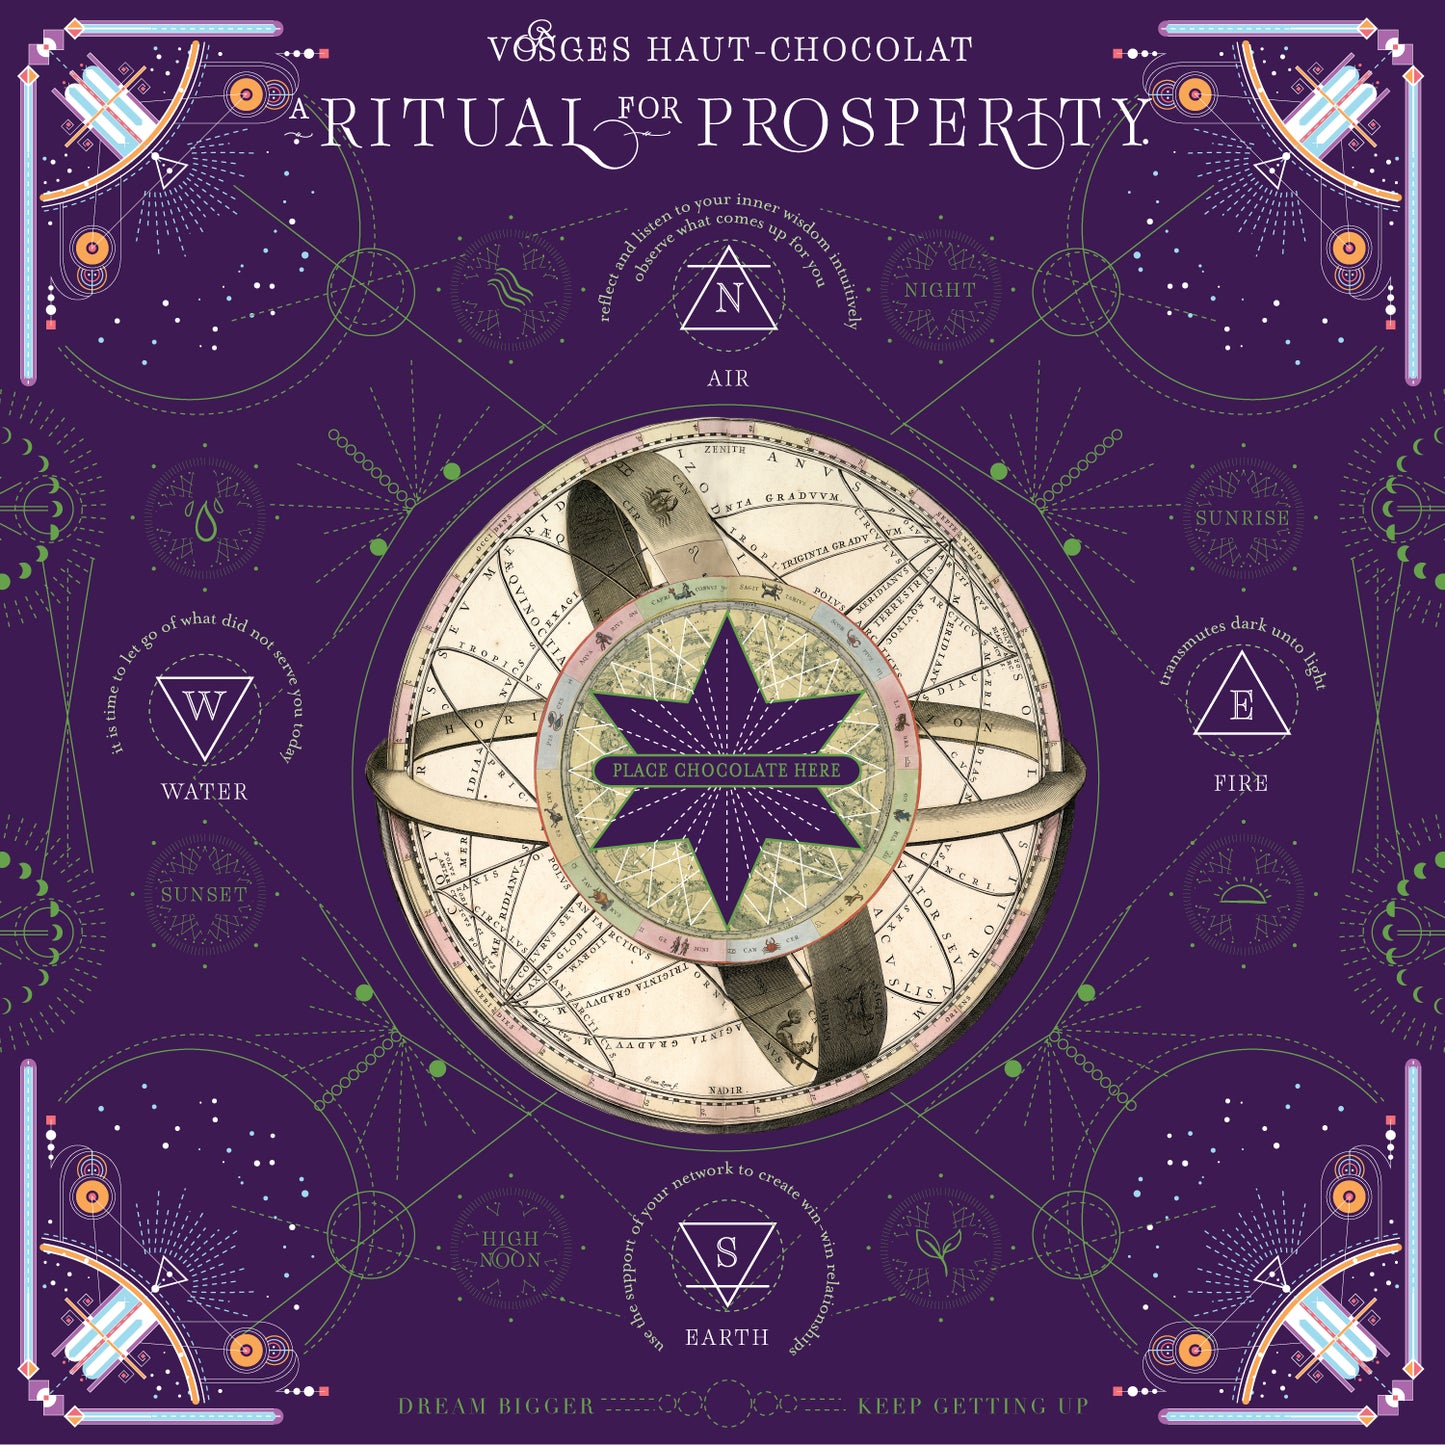 The Vosges ritual card for prosperity.  Purple decorated with ornate line drawings and design.